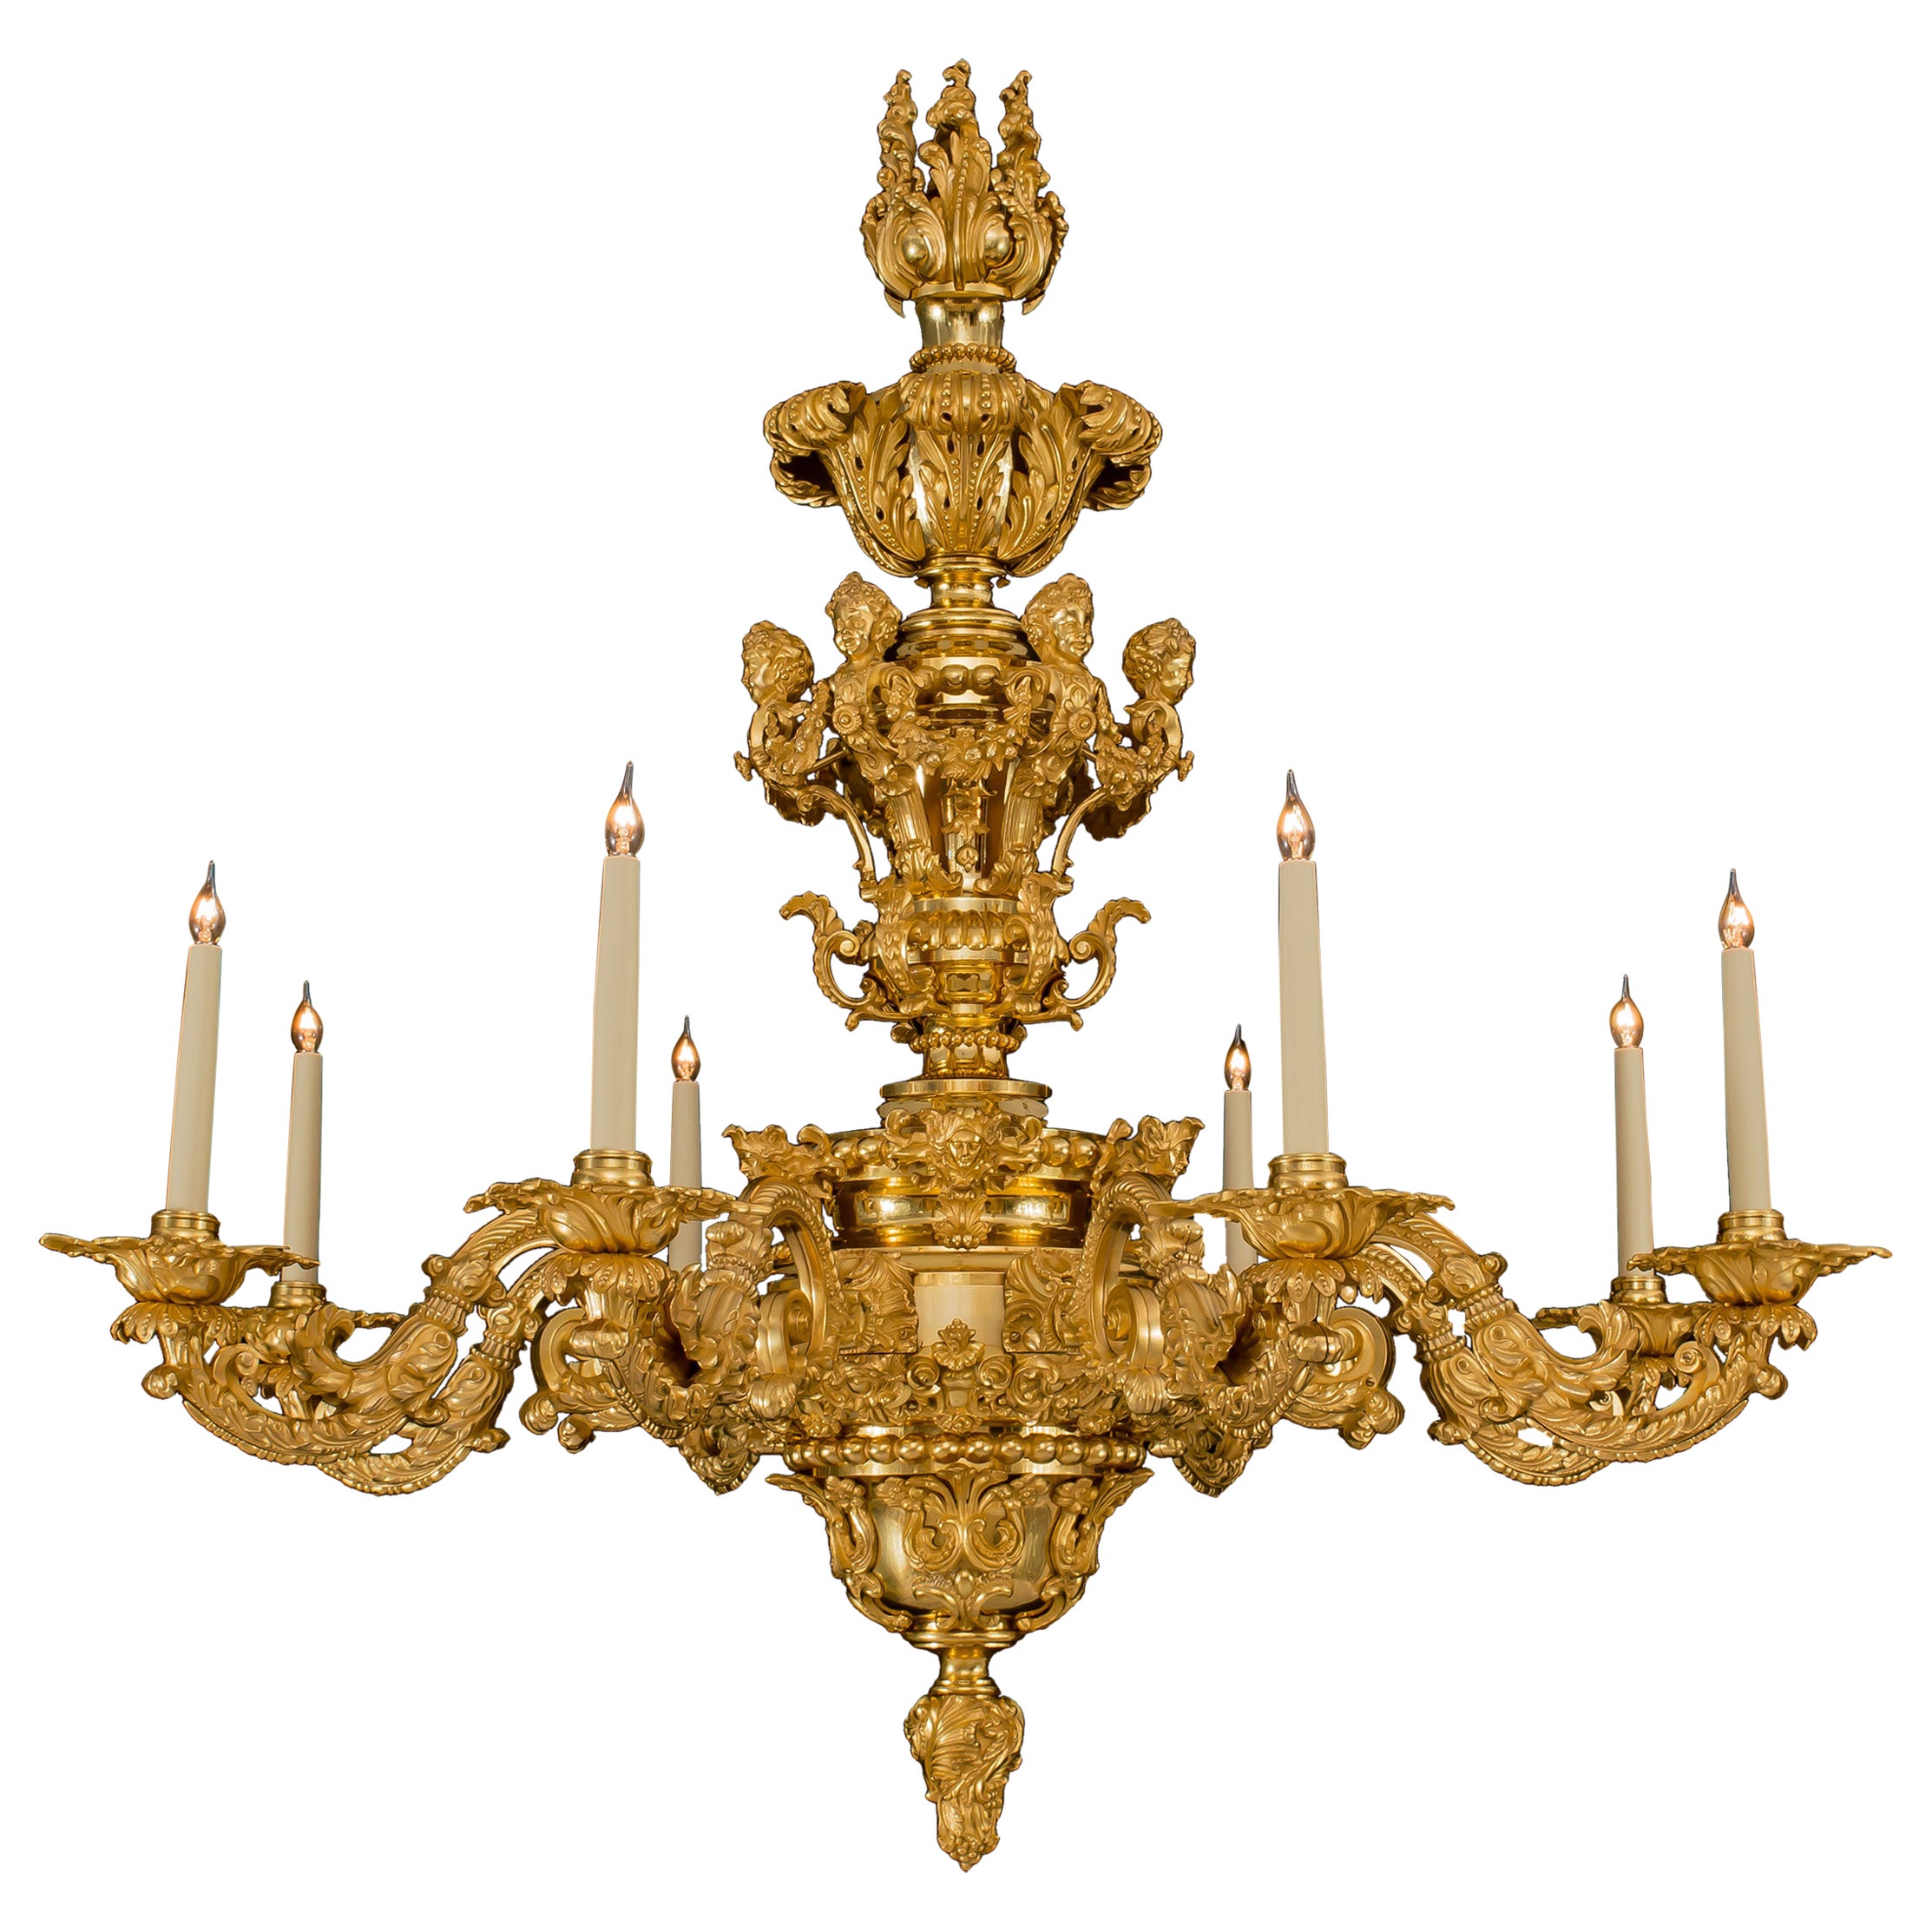 Magnificent George IV Period Ormolu Chandelier by Messenger & Phipson